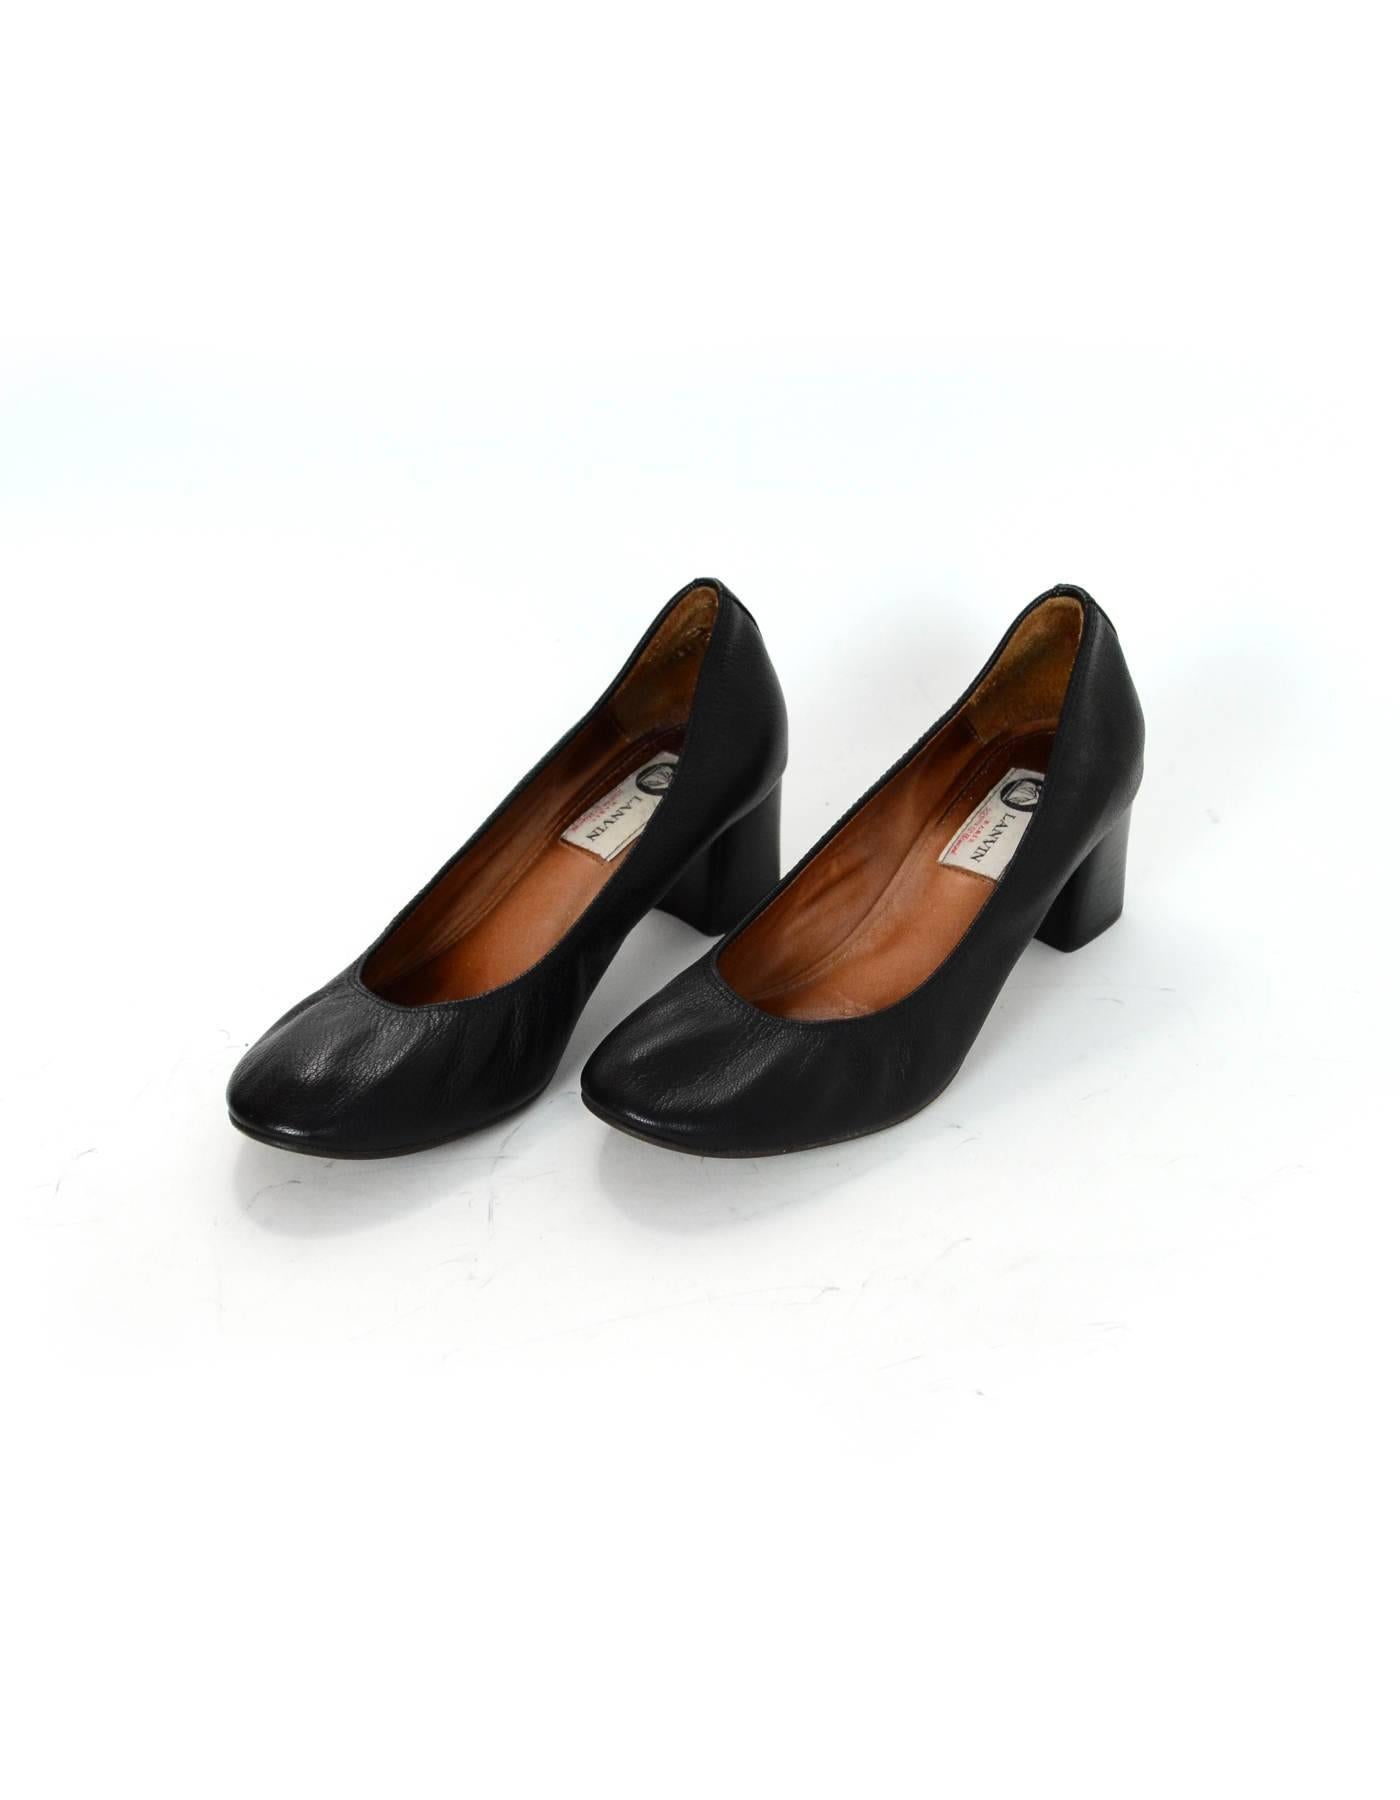 Lanvin Black Leather Pumps Sz 39

Made In: Portugal
Color: Black
Materials: Leather
Closure/Opening: Slide on
Sole Stamp: Lanvin 39
Overall Condition: Excellent pre-owned with the exception of some scuffing at heels, wear at insoles and